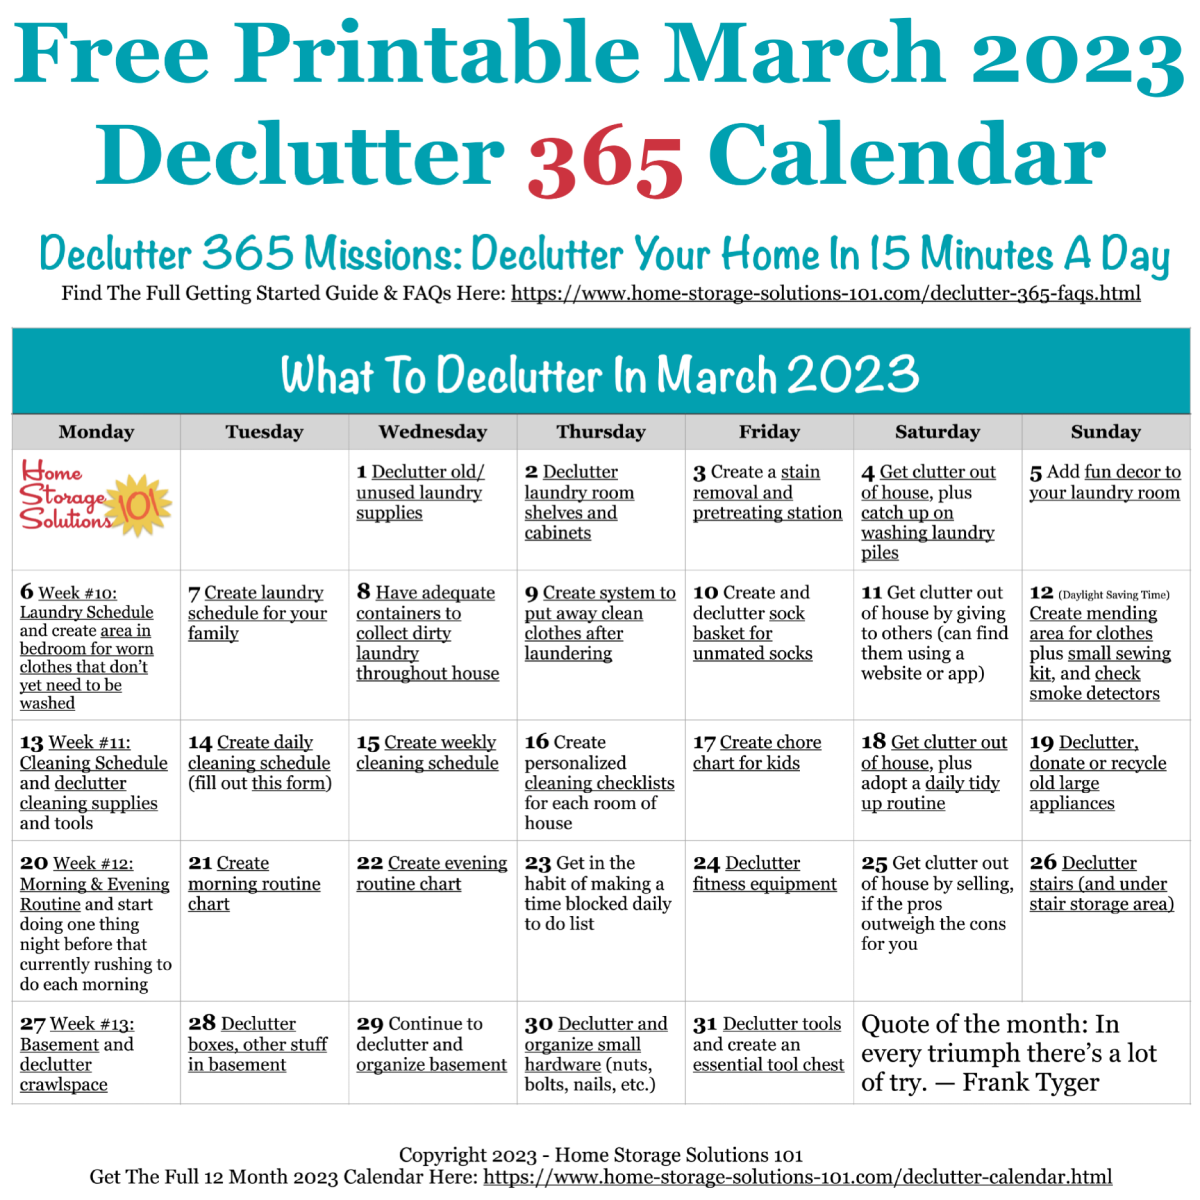 Free printable March 2023 #decluttering calendar with daily 15 minute missions. Follow the entire #Declutter365 plan provided by Home Storage Solutions 101 to #declutter your whole house in a year.